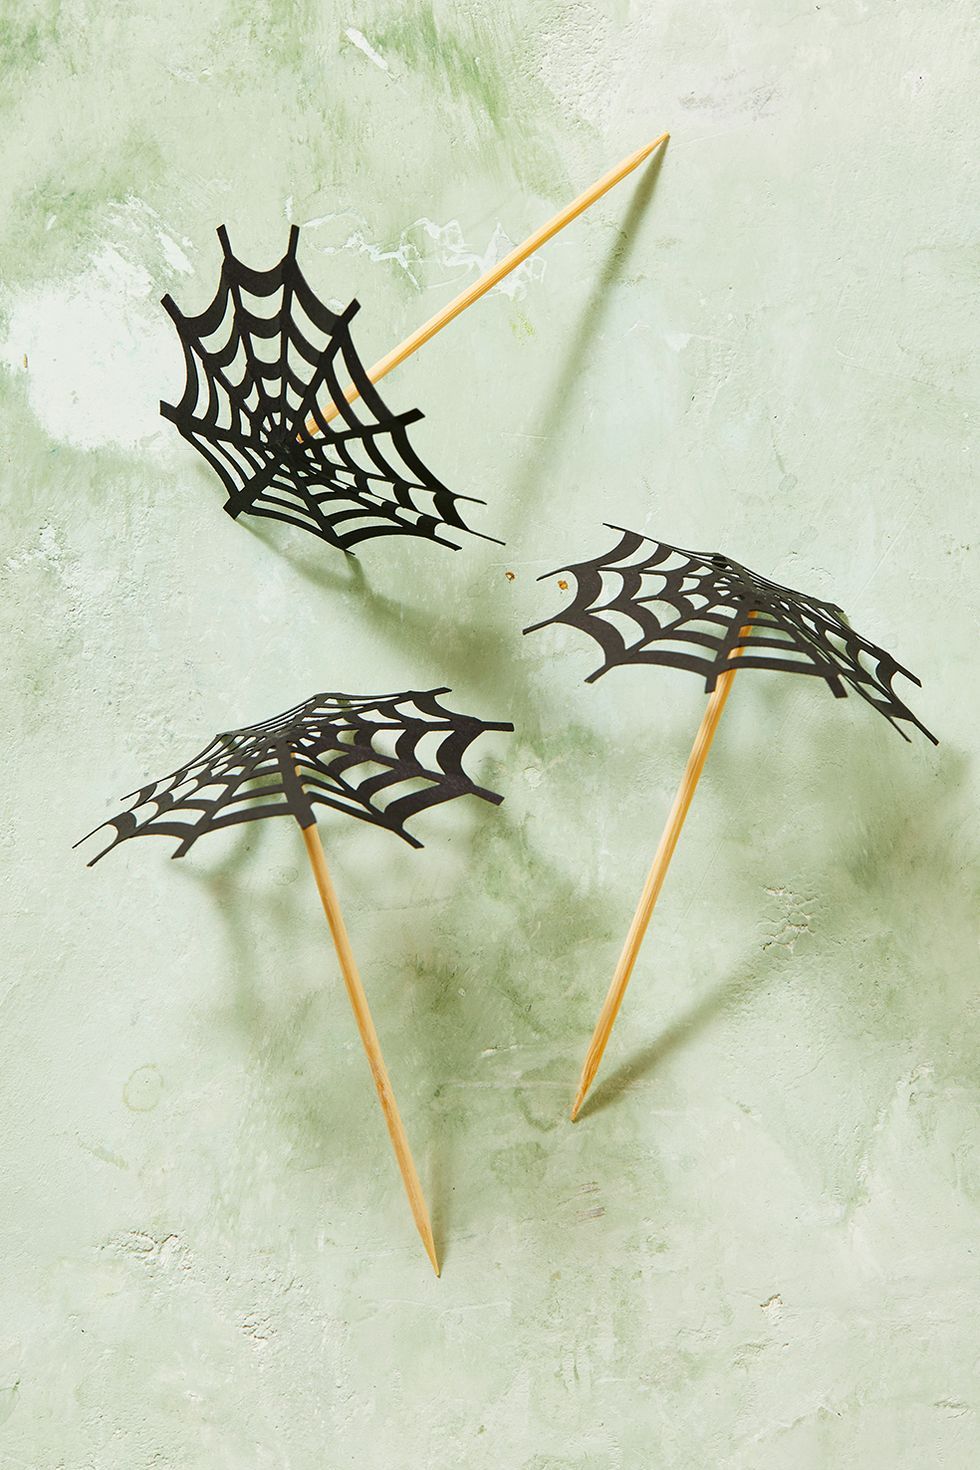 https://hips.hearstapps.com/hmg-prod/images/fall-crafts-for-adults-spider-web-umbrellas-1657747961.jpeg?crop=1xw:0.998641304347826xh;center,top&resize=980:*